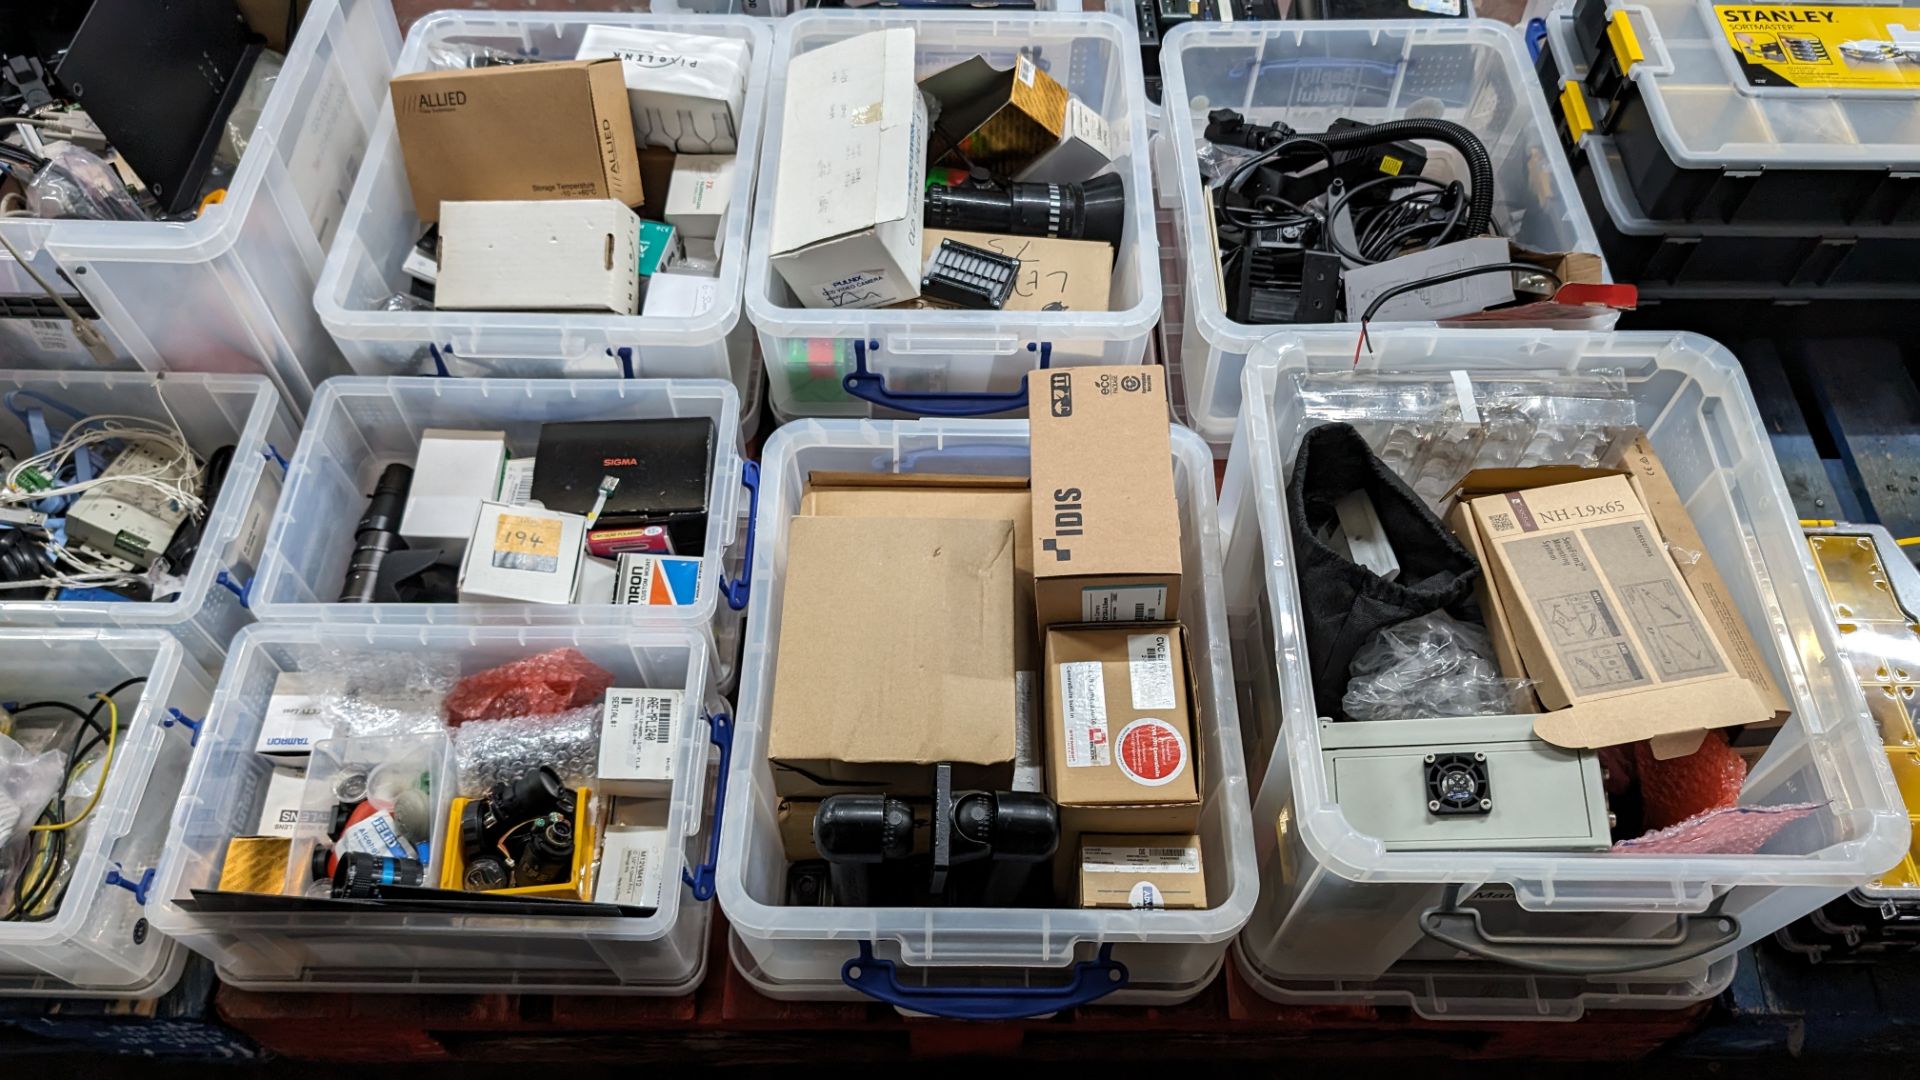 The contents of a pallet of CCTV camera components, lenses and similar